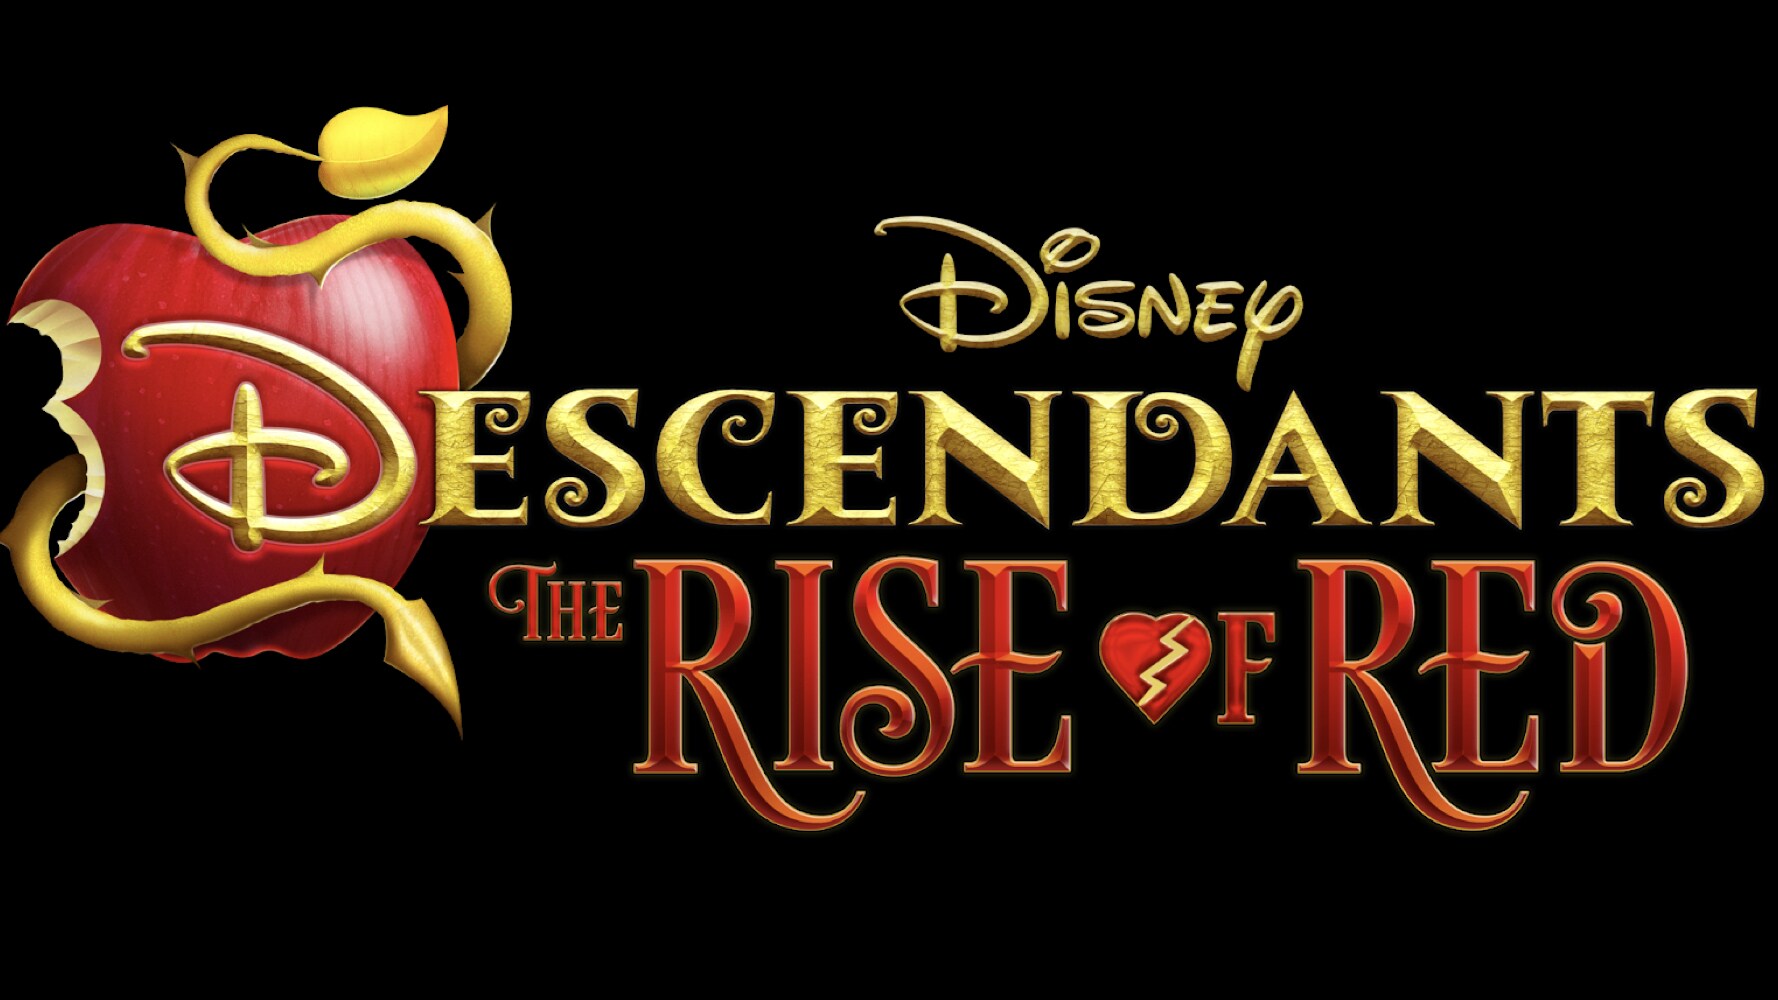 China Anne Mcclain & Kylie Cantrall Perform “What’s My Name (Red Version)” From “Descendants: The Rise Of Red” Soundtrack In New Music Video